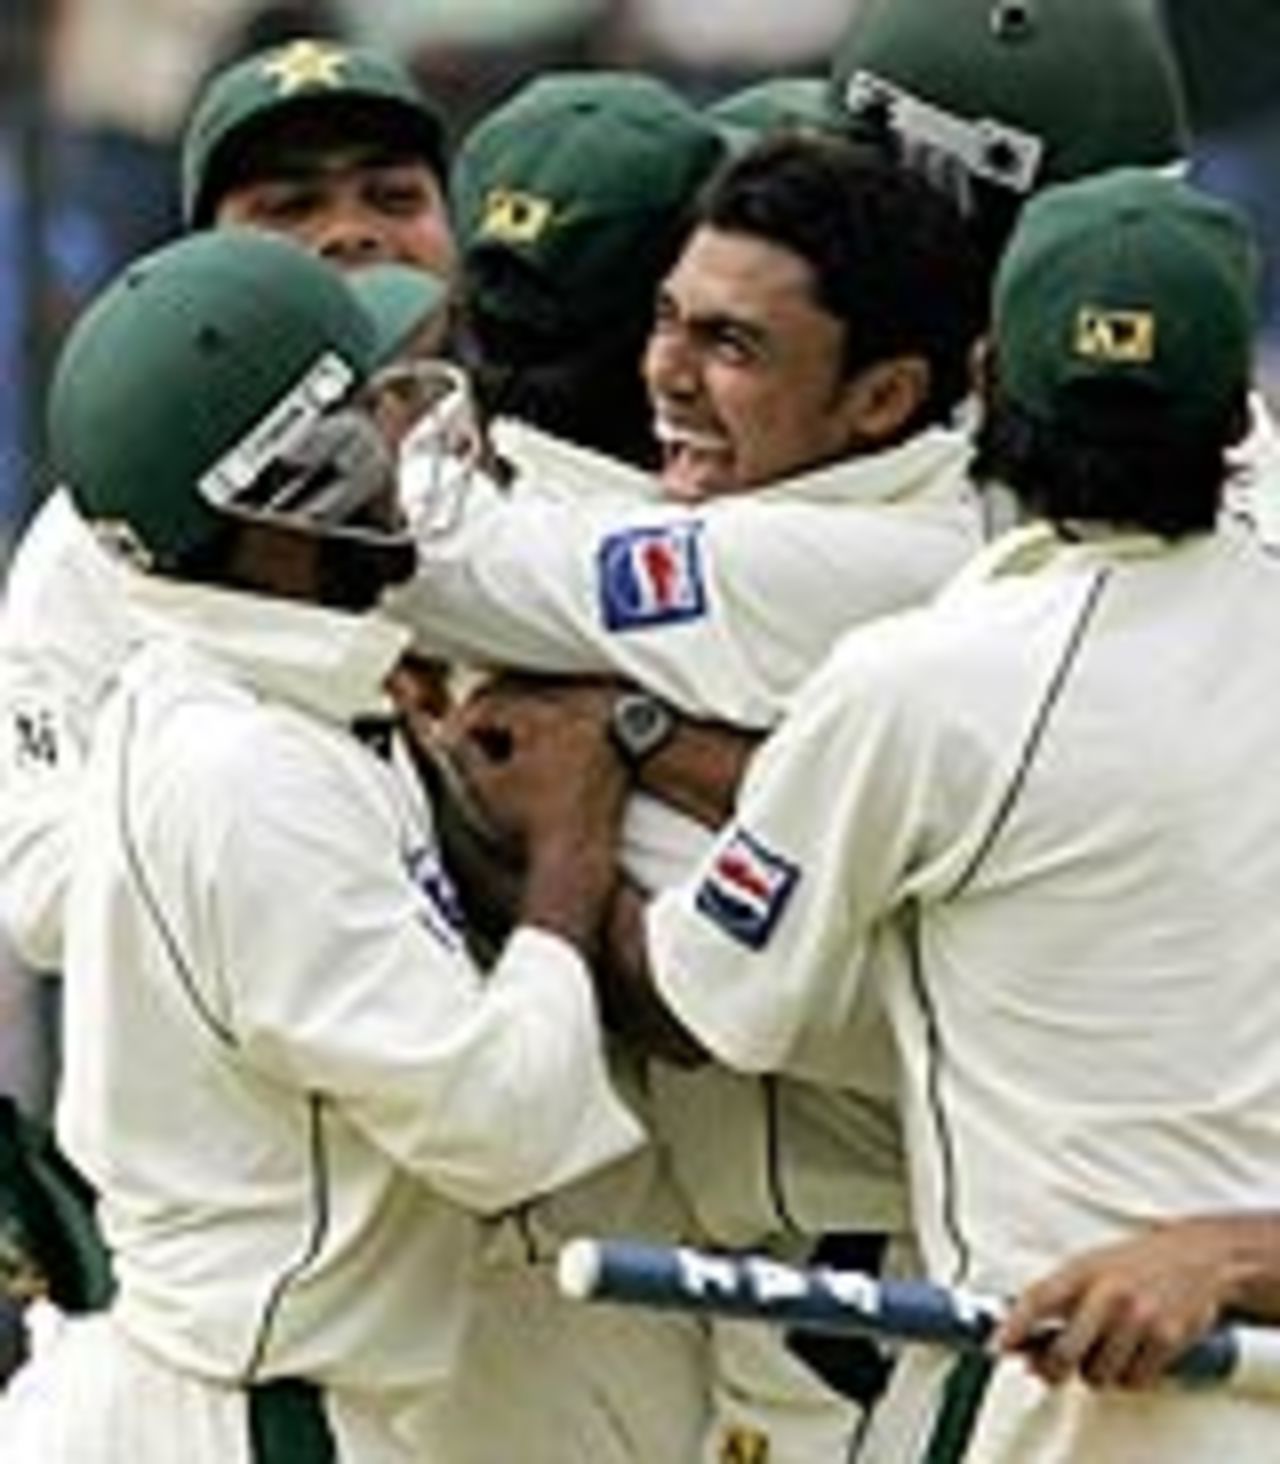 Danish Kaneria celebrates with his teammates, India v Pakistan, 3rd Test, Bangalore, 5th day, March 28, 2005